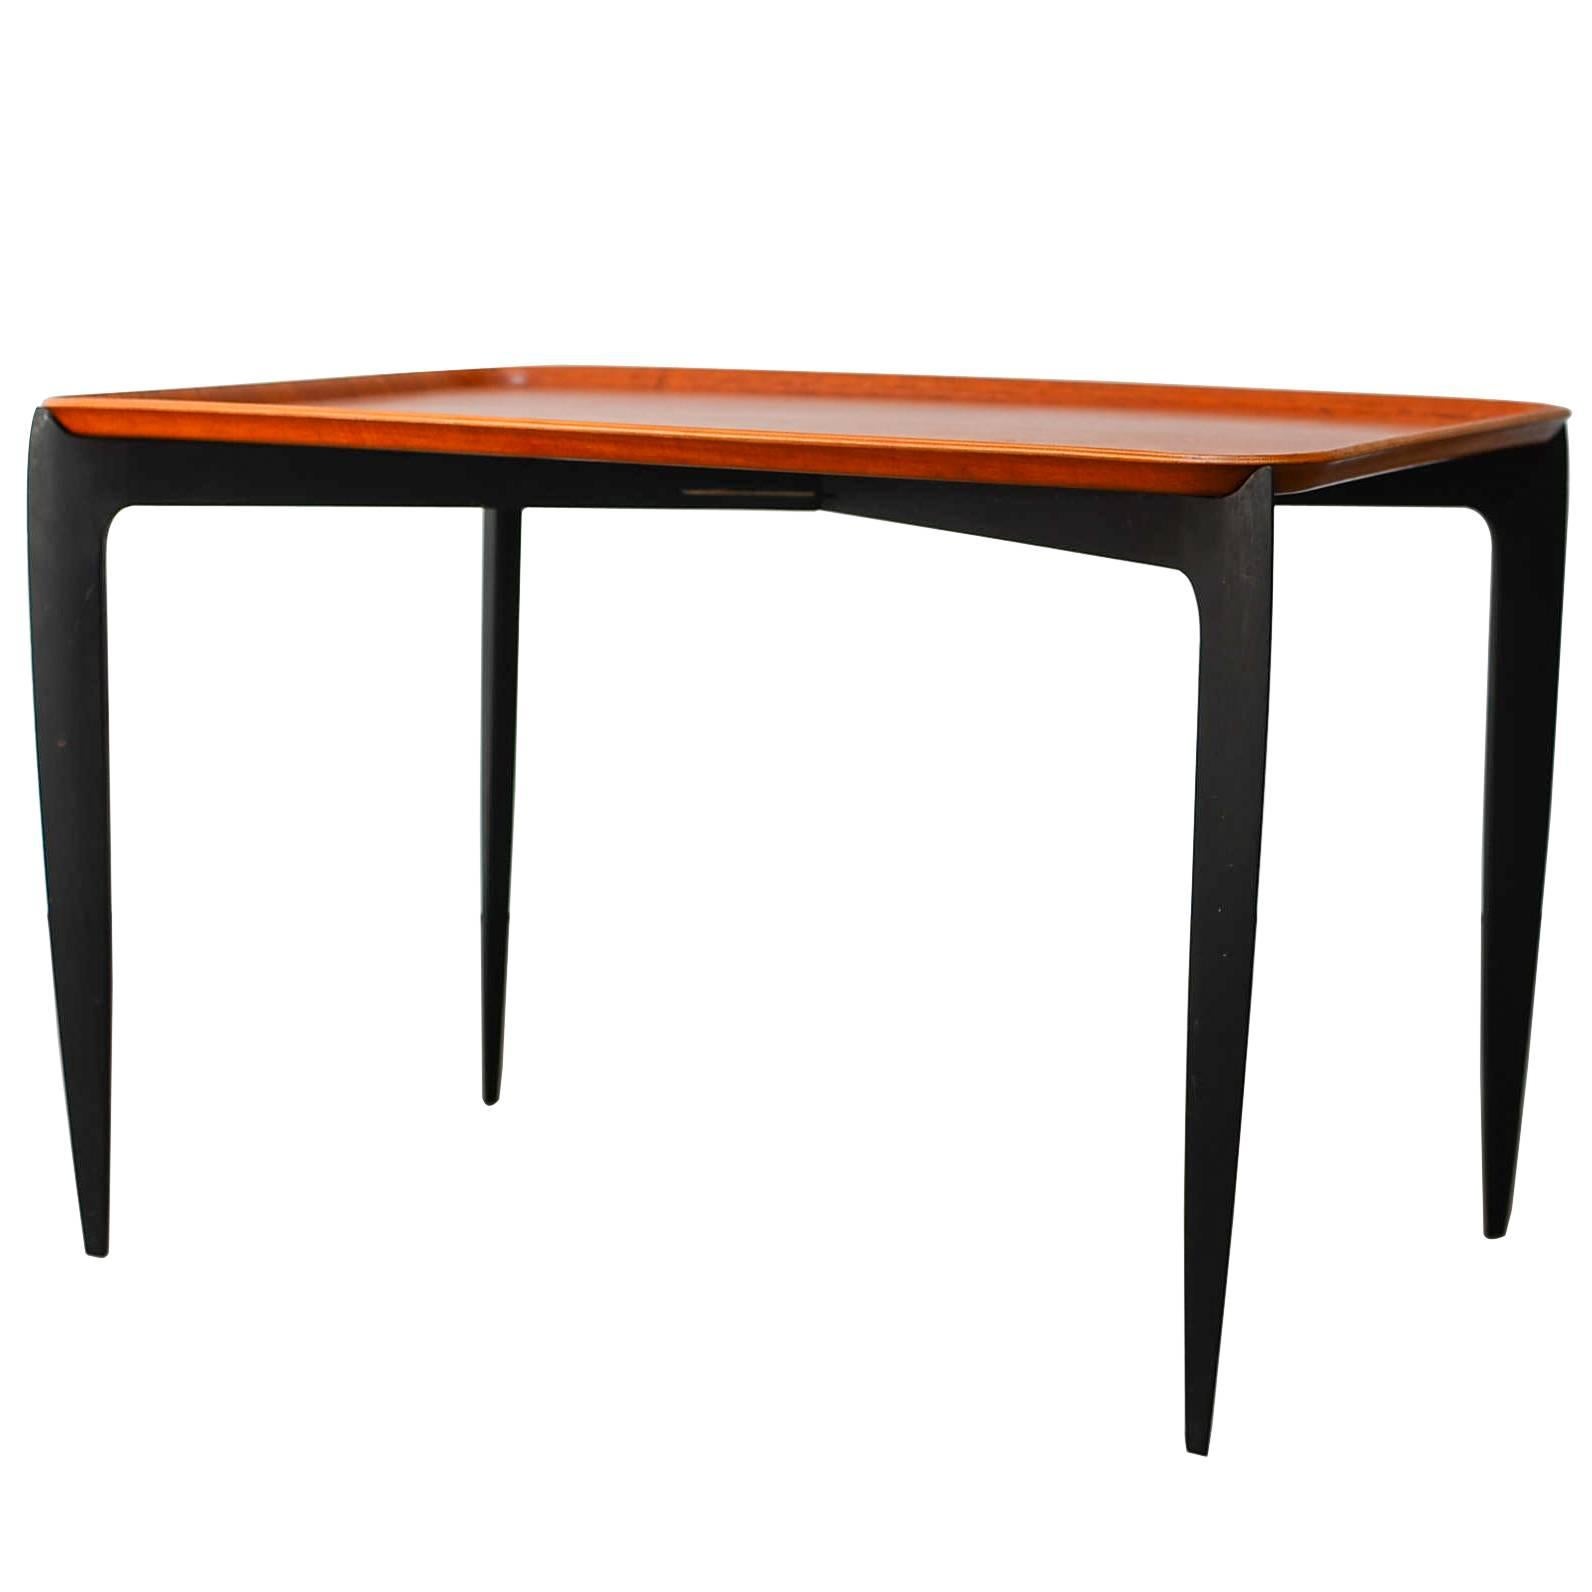 Rare Tray Table by Willumsen & Engholm for Fritz Hansen, Denmark, 1950s For Sale